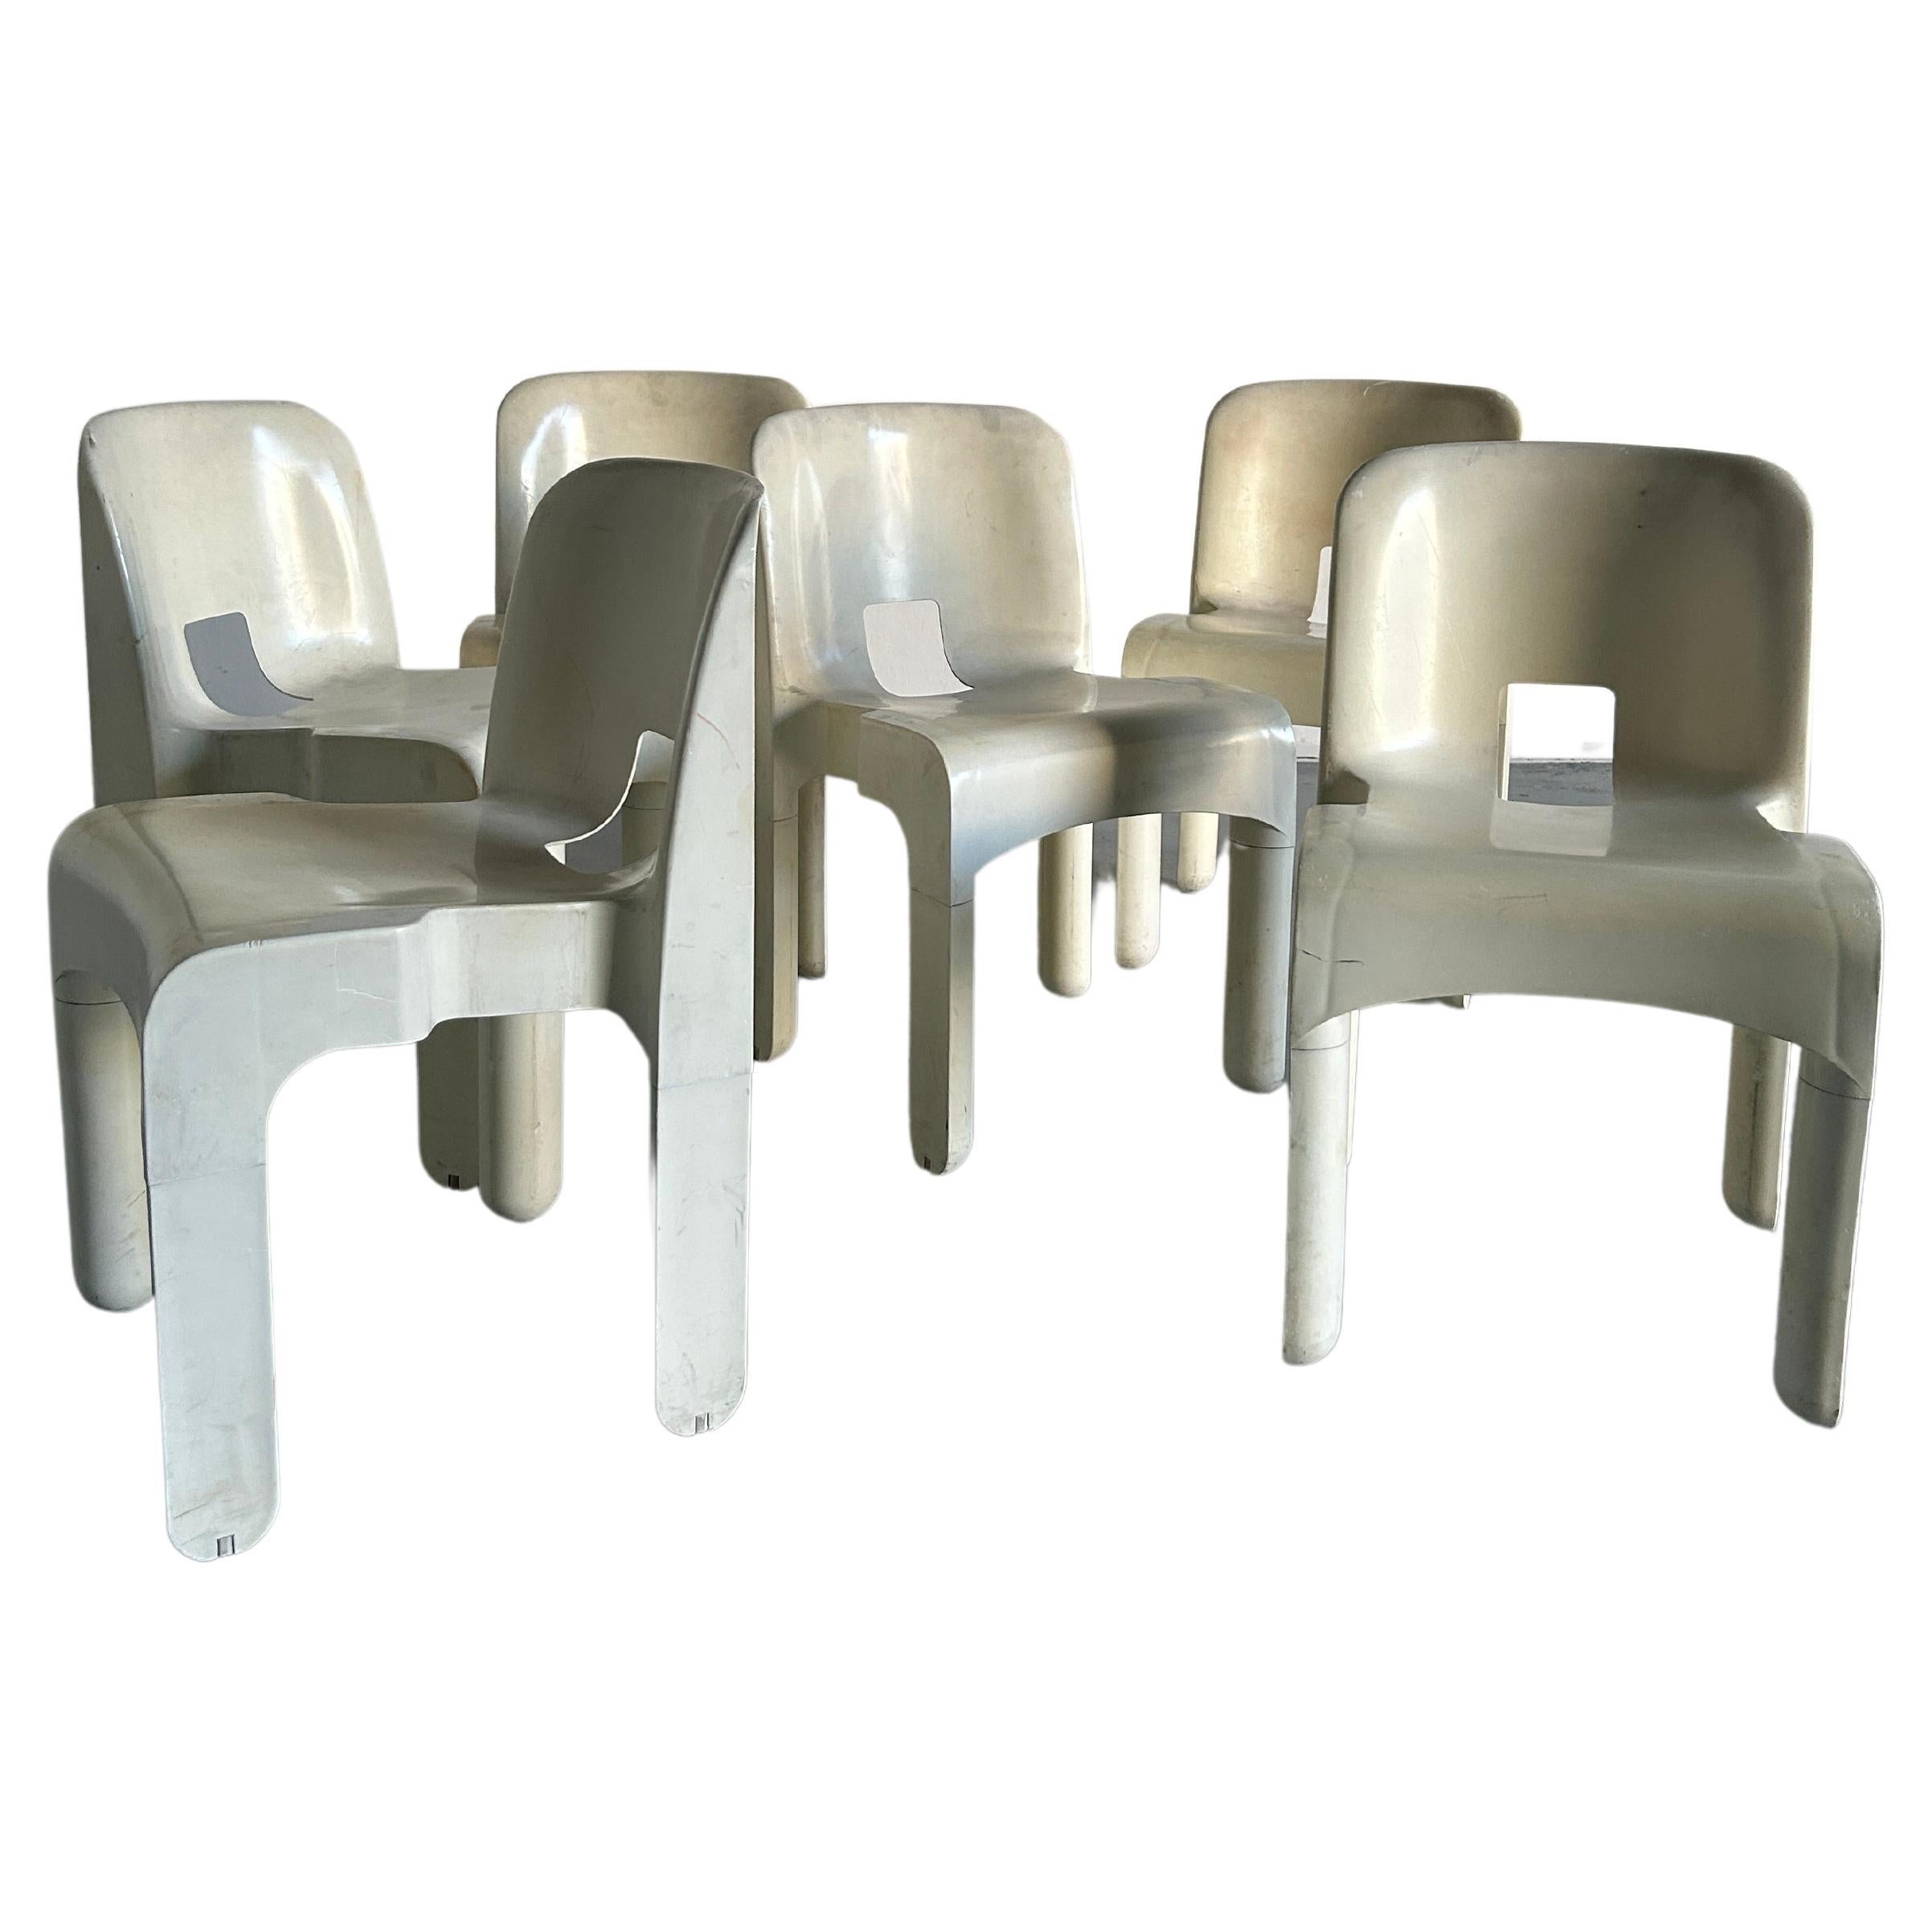 Iconic Italian Mid-century white plastic chairs model 4867 by Joe Colombo for Kartell. 
The model 4867 is also known as 'Universale' chair. The rectangular seat has two flaps on the outside. The slightly curved backrest is rectangular with rounded